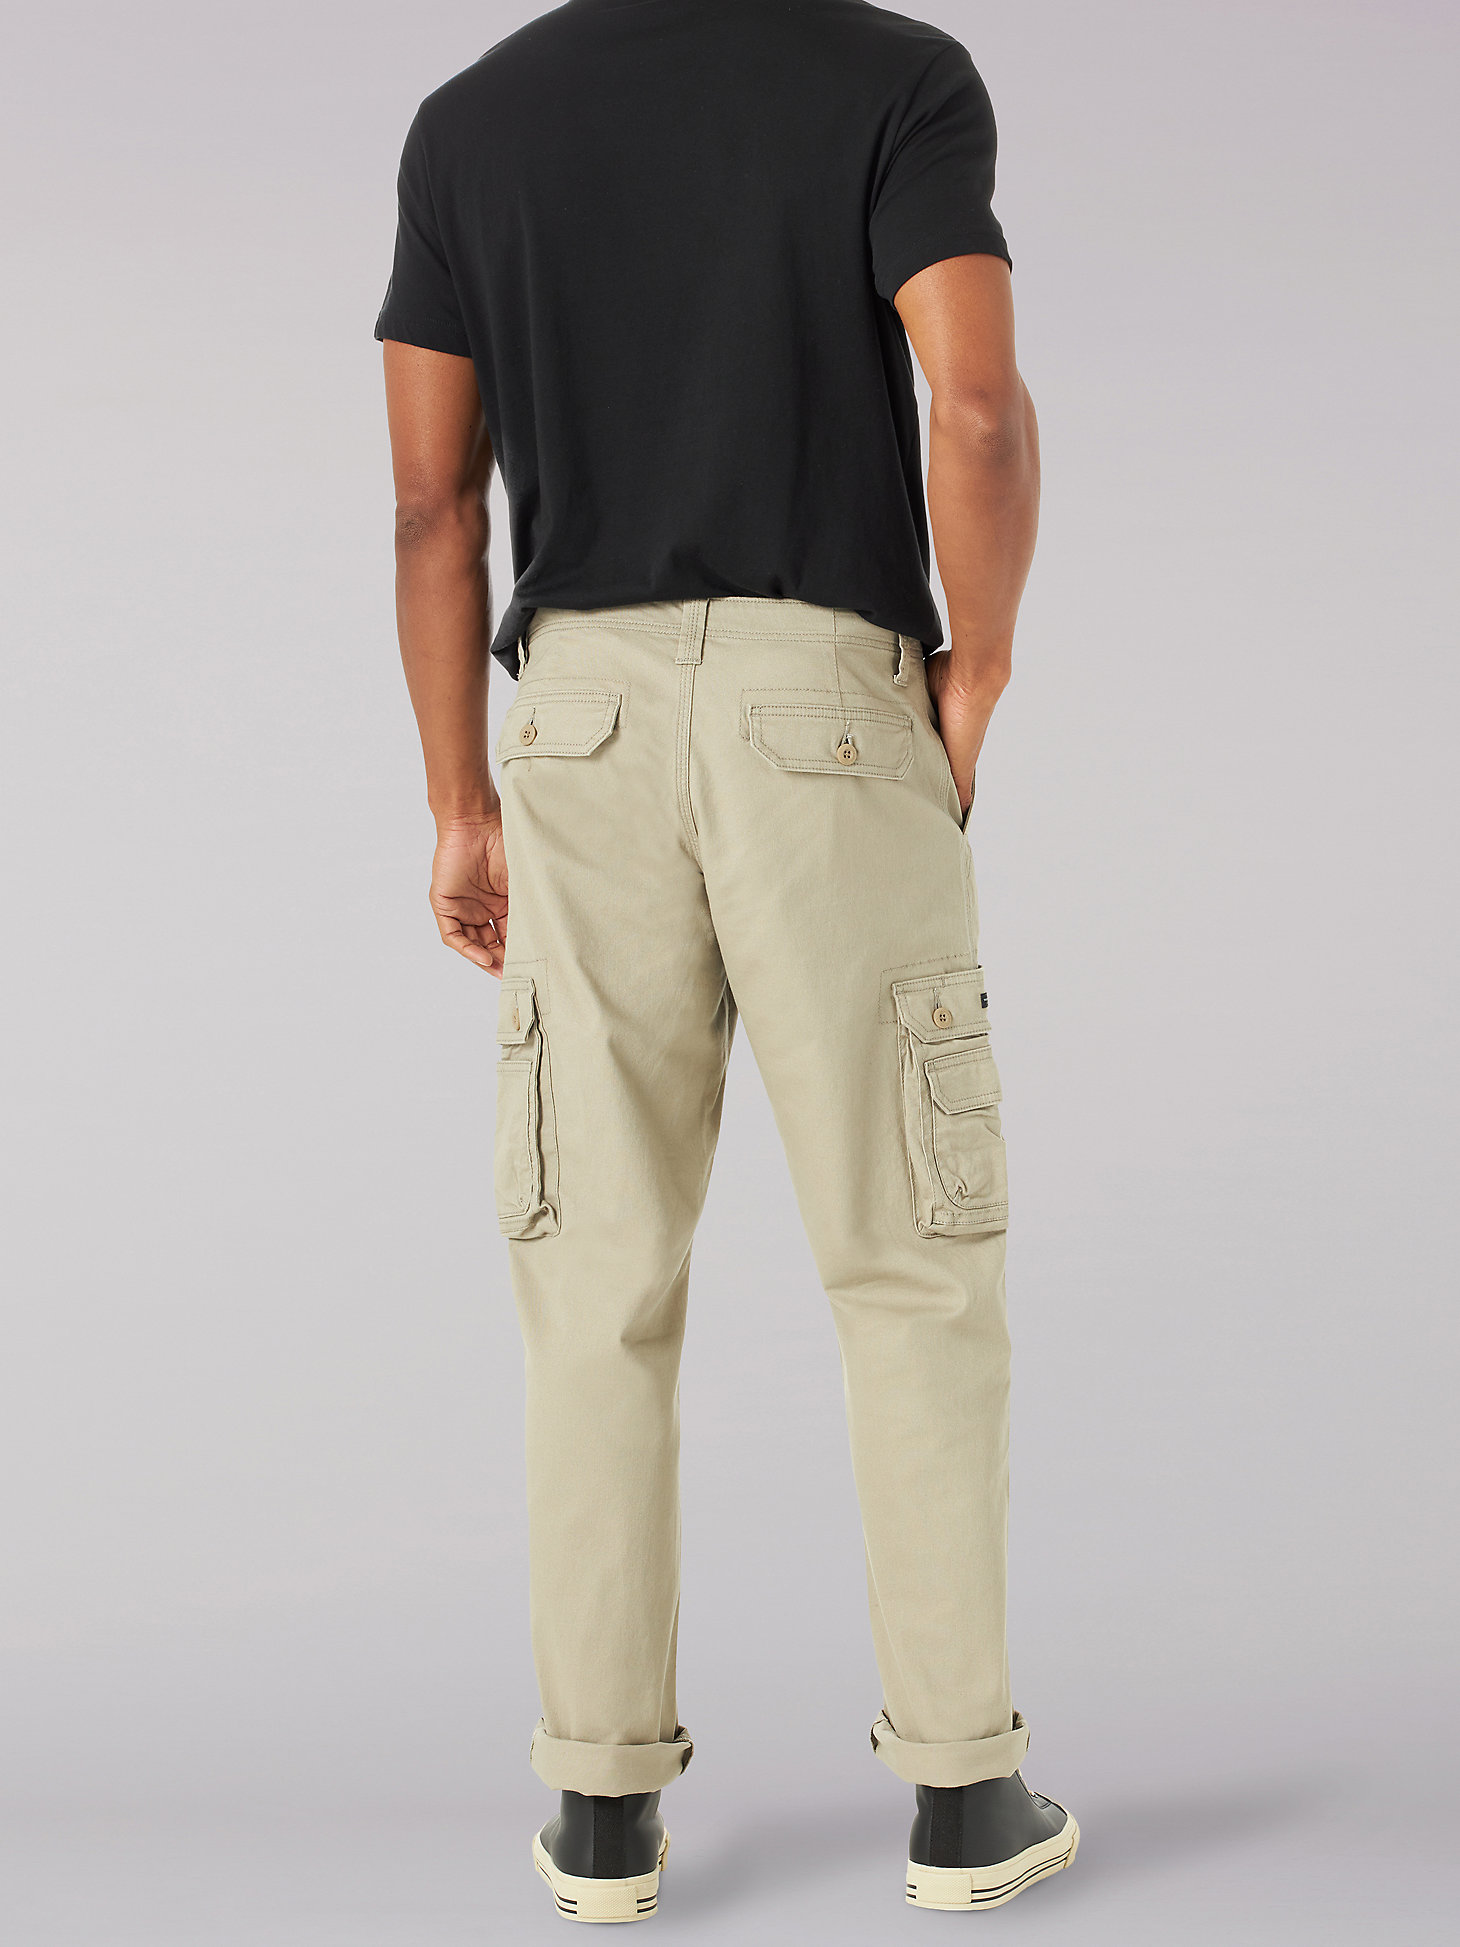 Men's Wyoming Relaxed Fit Cargo Twill Pant in Pebble alternative view 1